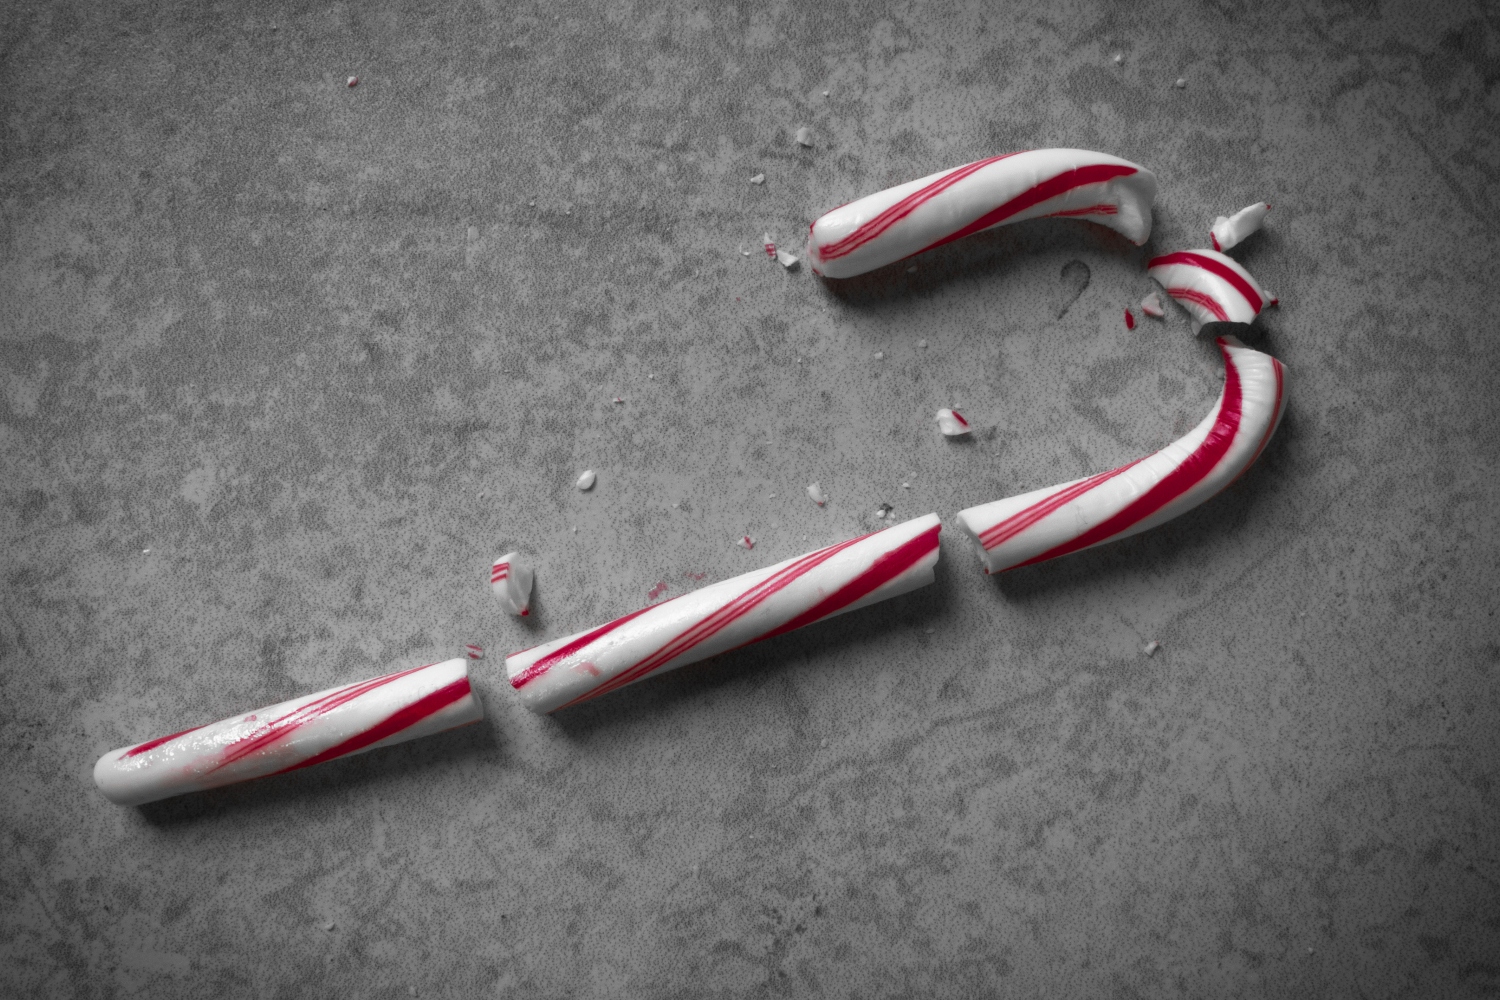 Moody Top-Down Shot of a Red and White Candy Cane that has Been Shattered into Multiple Pieces. Due to Covid and supply chain issues, there is a candy cane shortage this year.